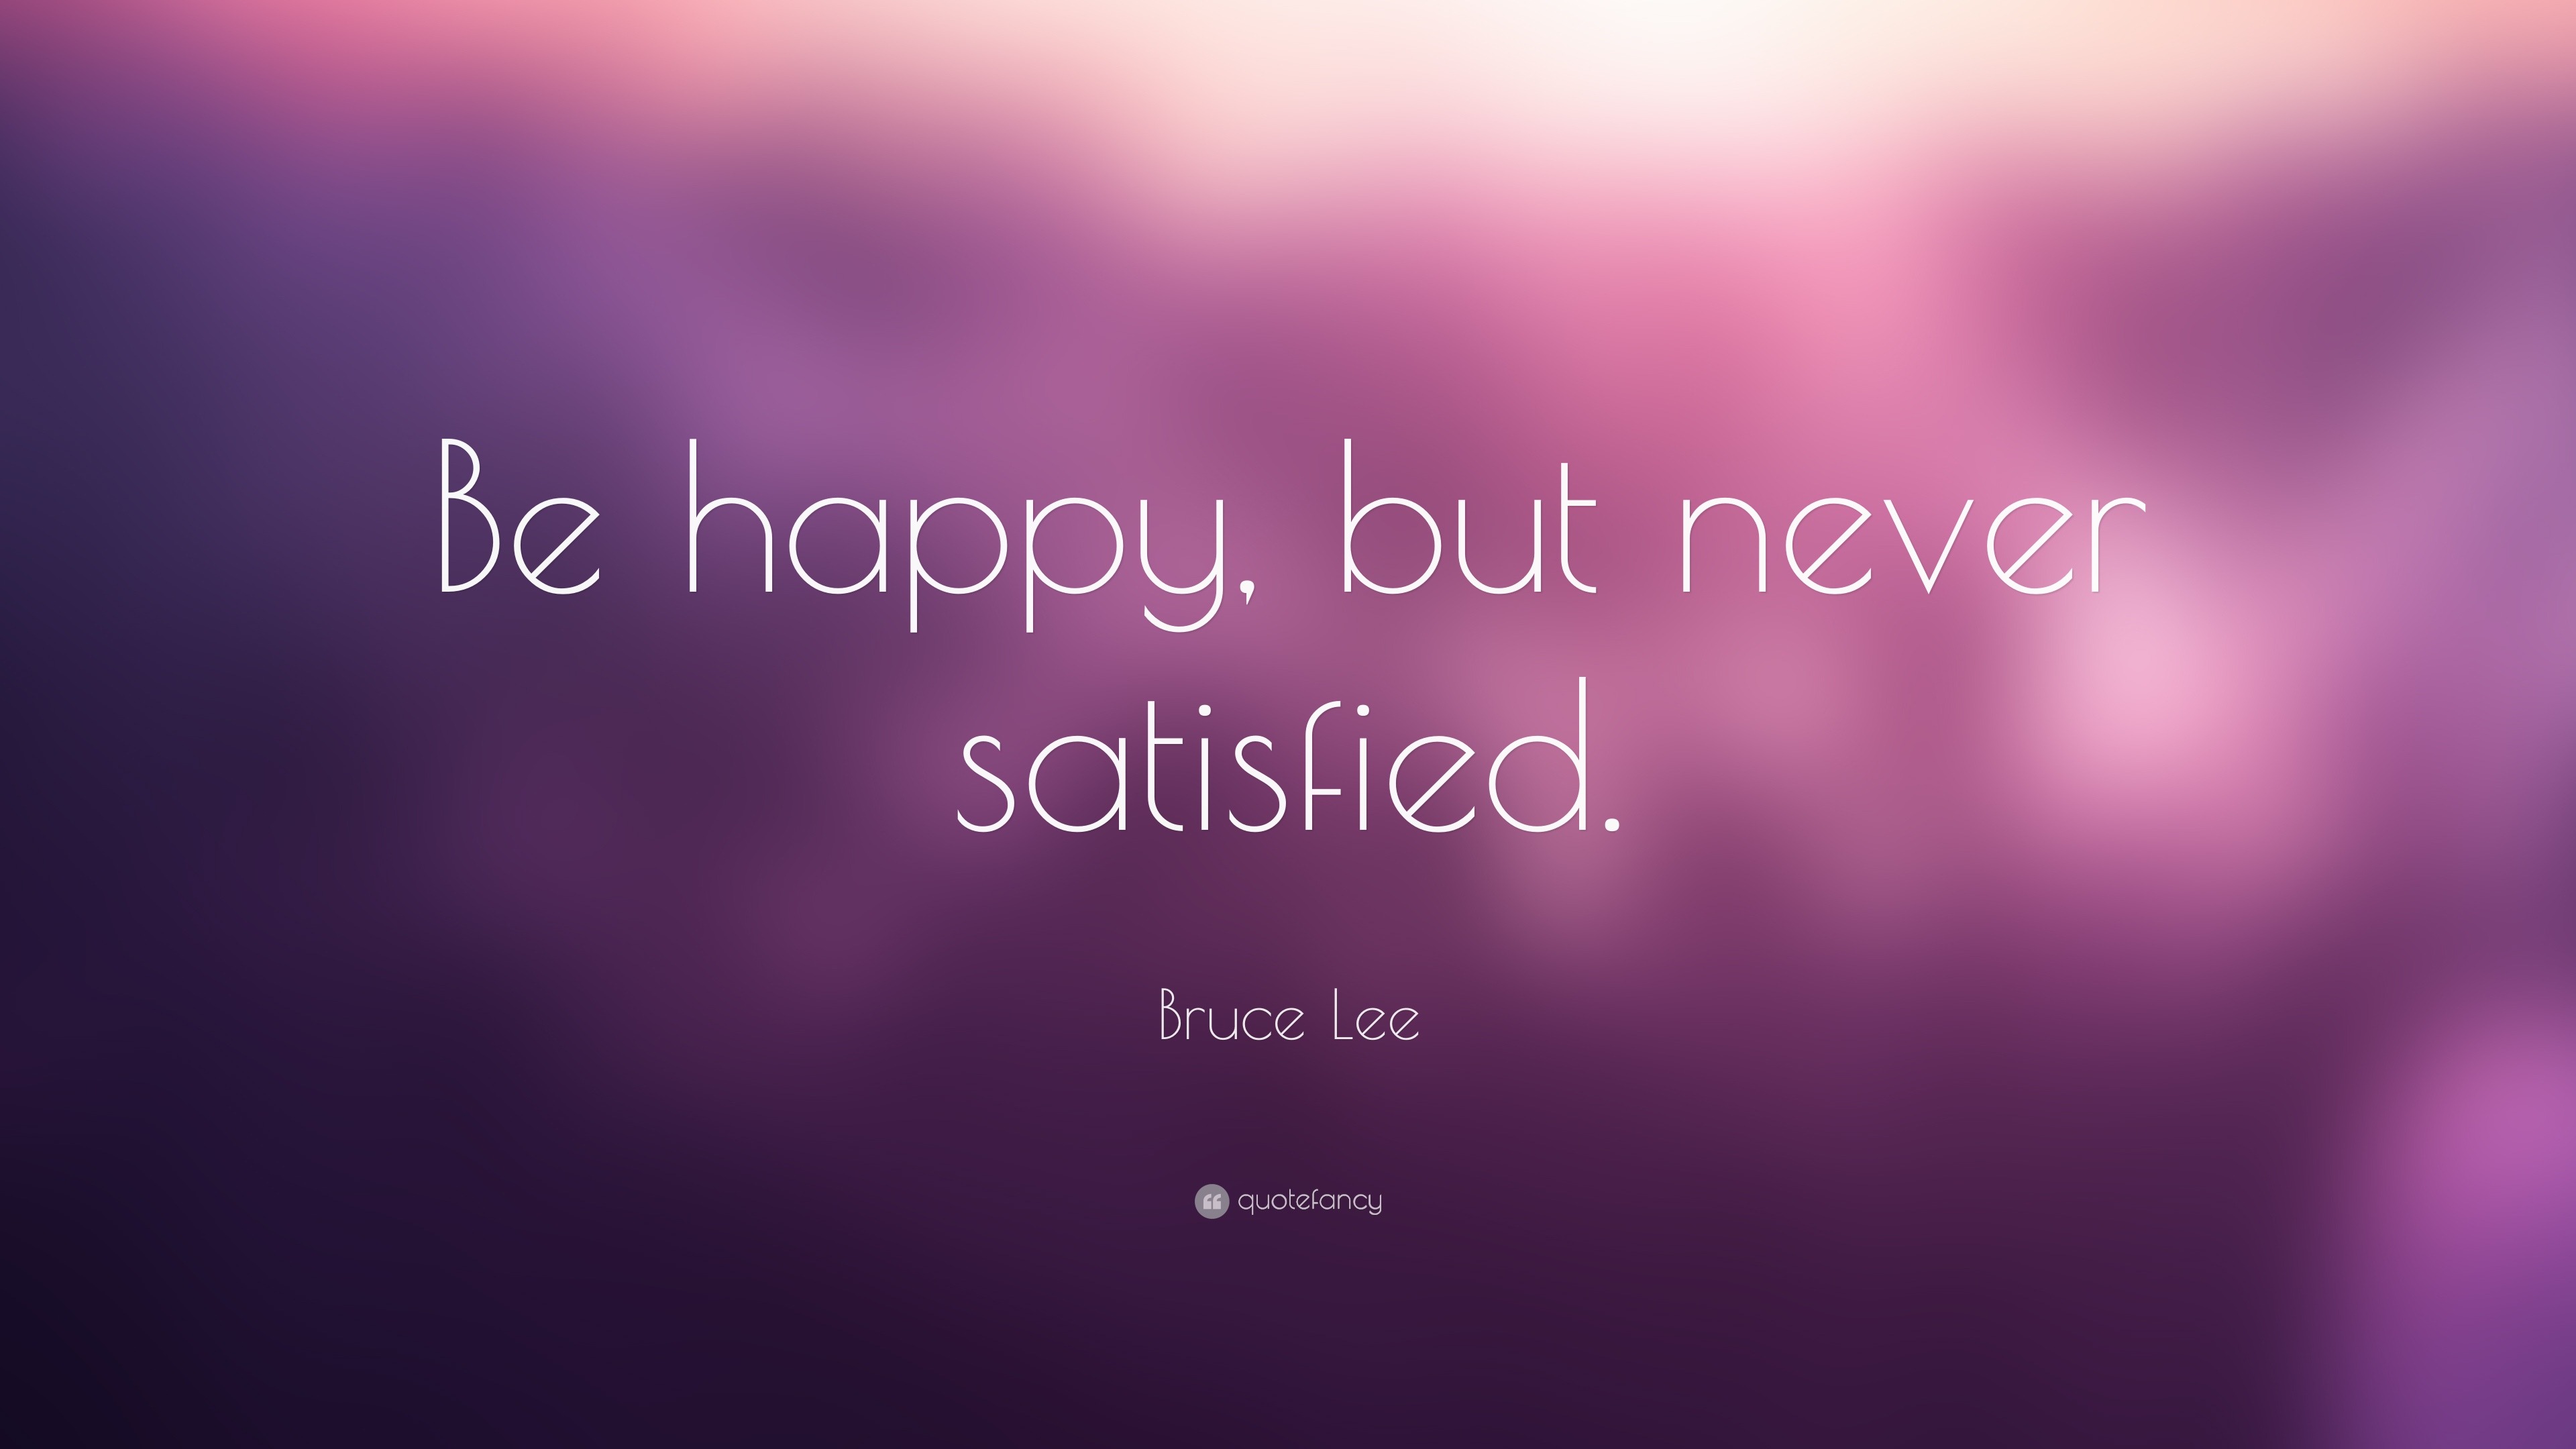 Bruce Lee Quote: "Be happy, but never satisfied." (22 ...